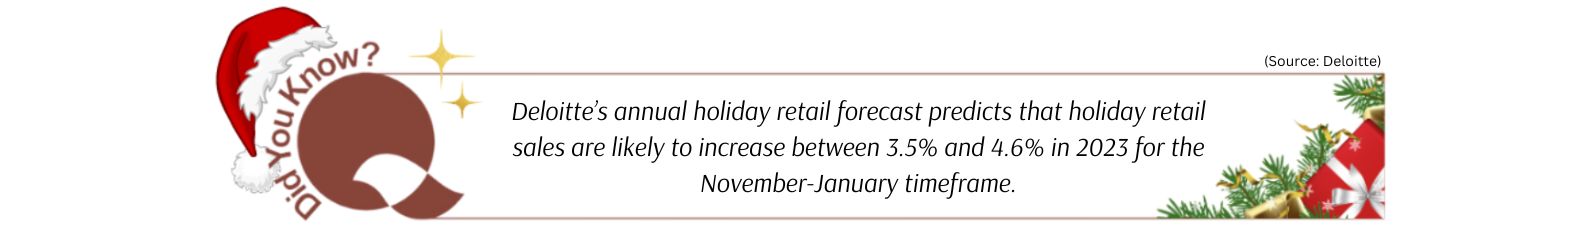 Did you know: Deloitte's annual holiday retail forecast predicts that holiday retail sales are likely to increase between 3.5% and 4.6% in 2023 for the November-January timeframe.